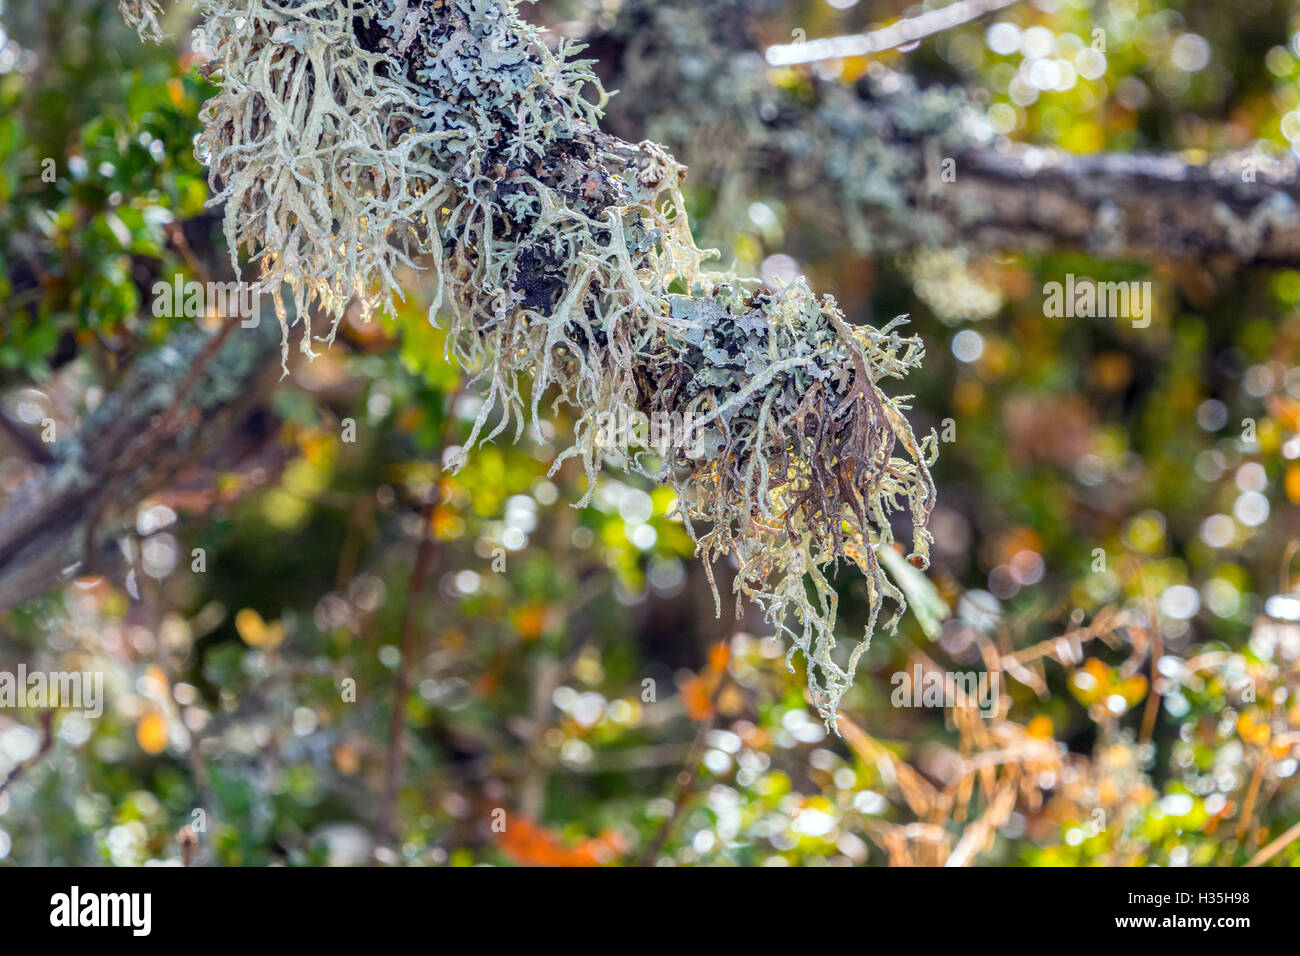 Luxuriant grey gray lichen growing on tree branch, France Stock Photo